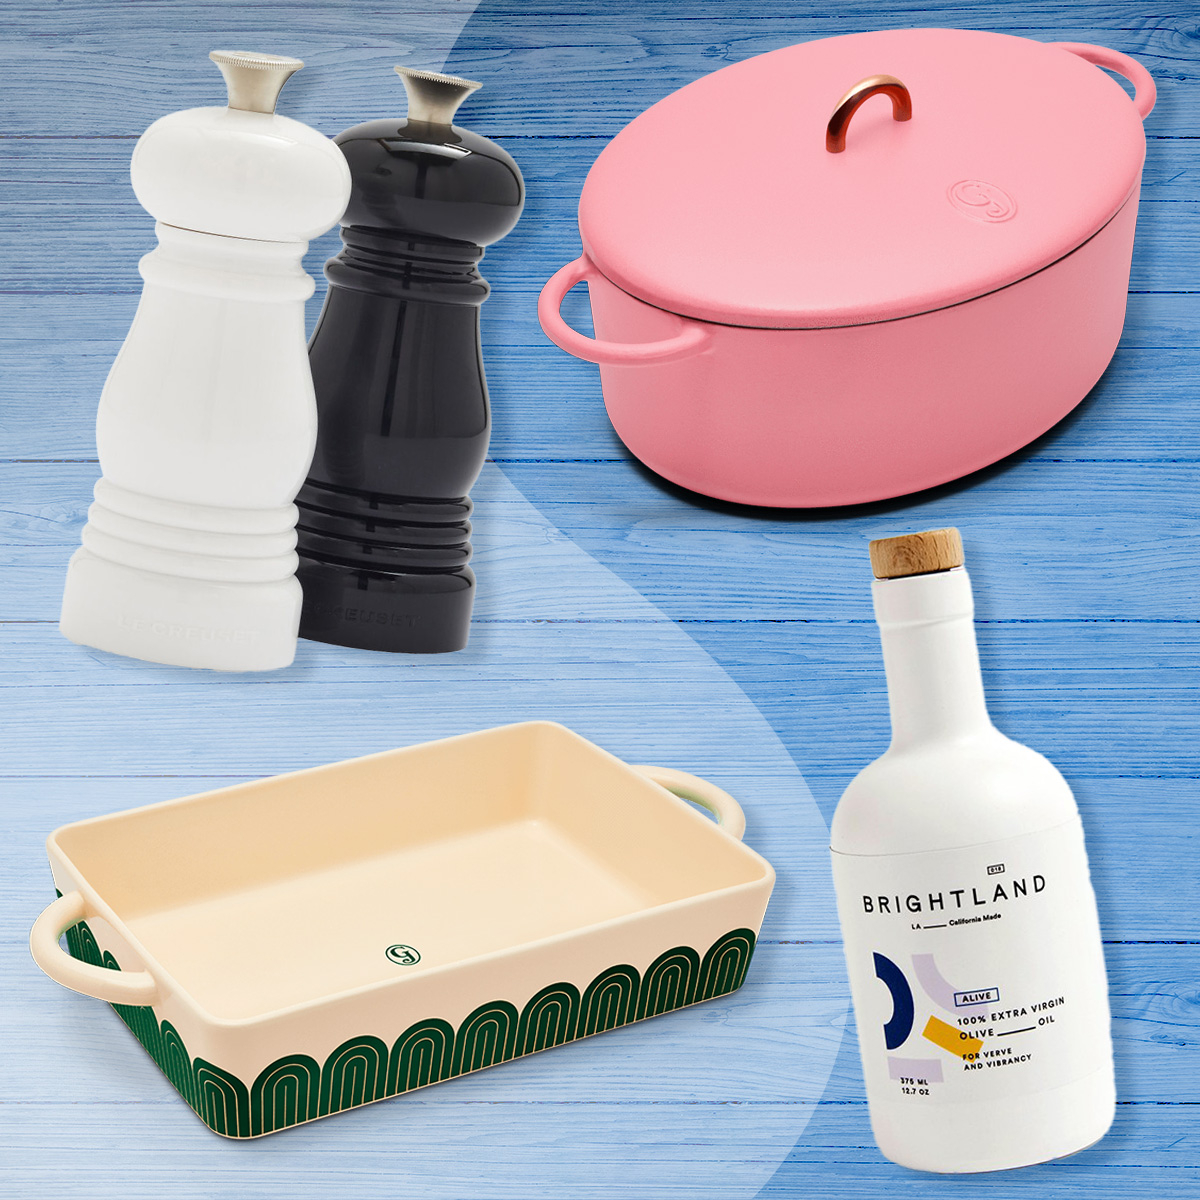 HexClad Just Added Two New Cooking Must-Haves to Their Lineup